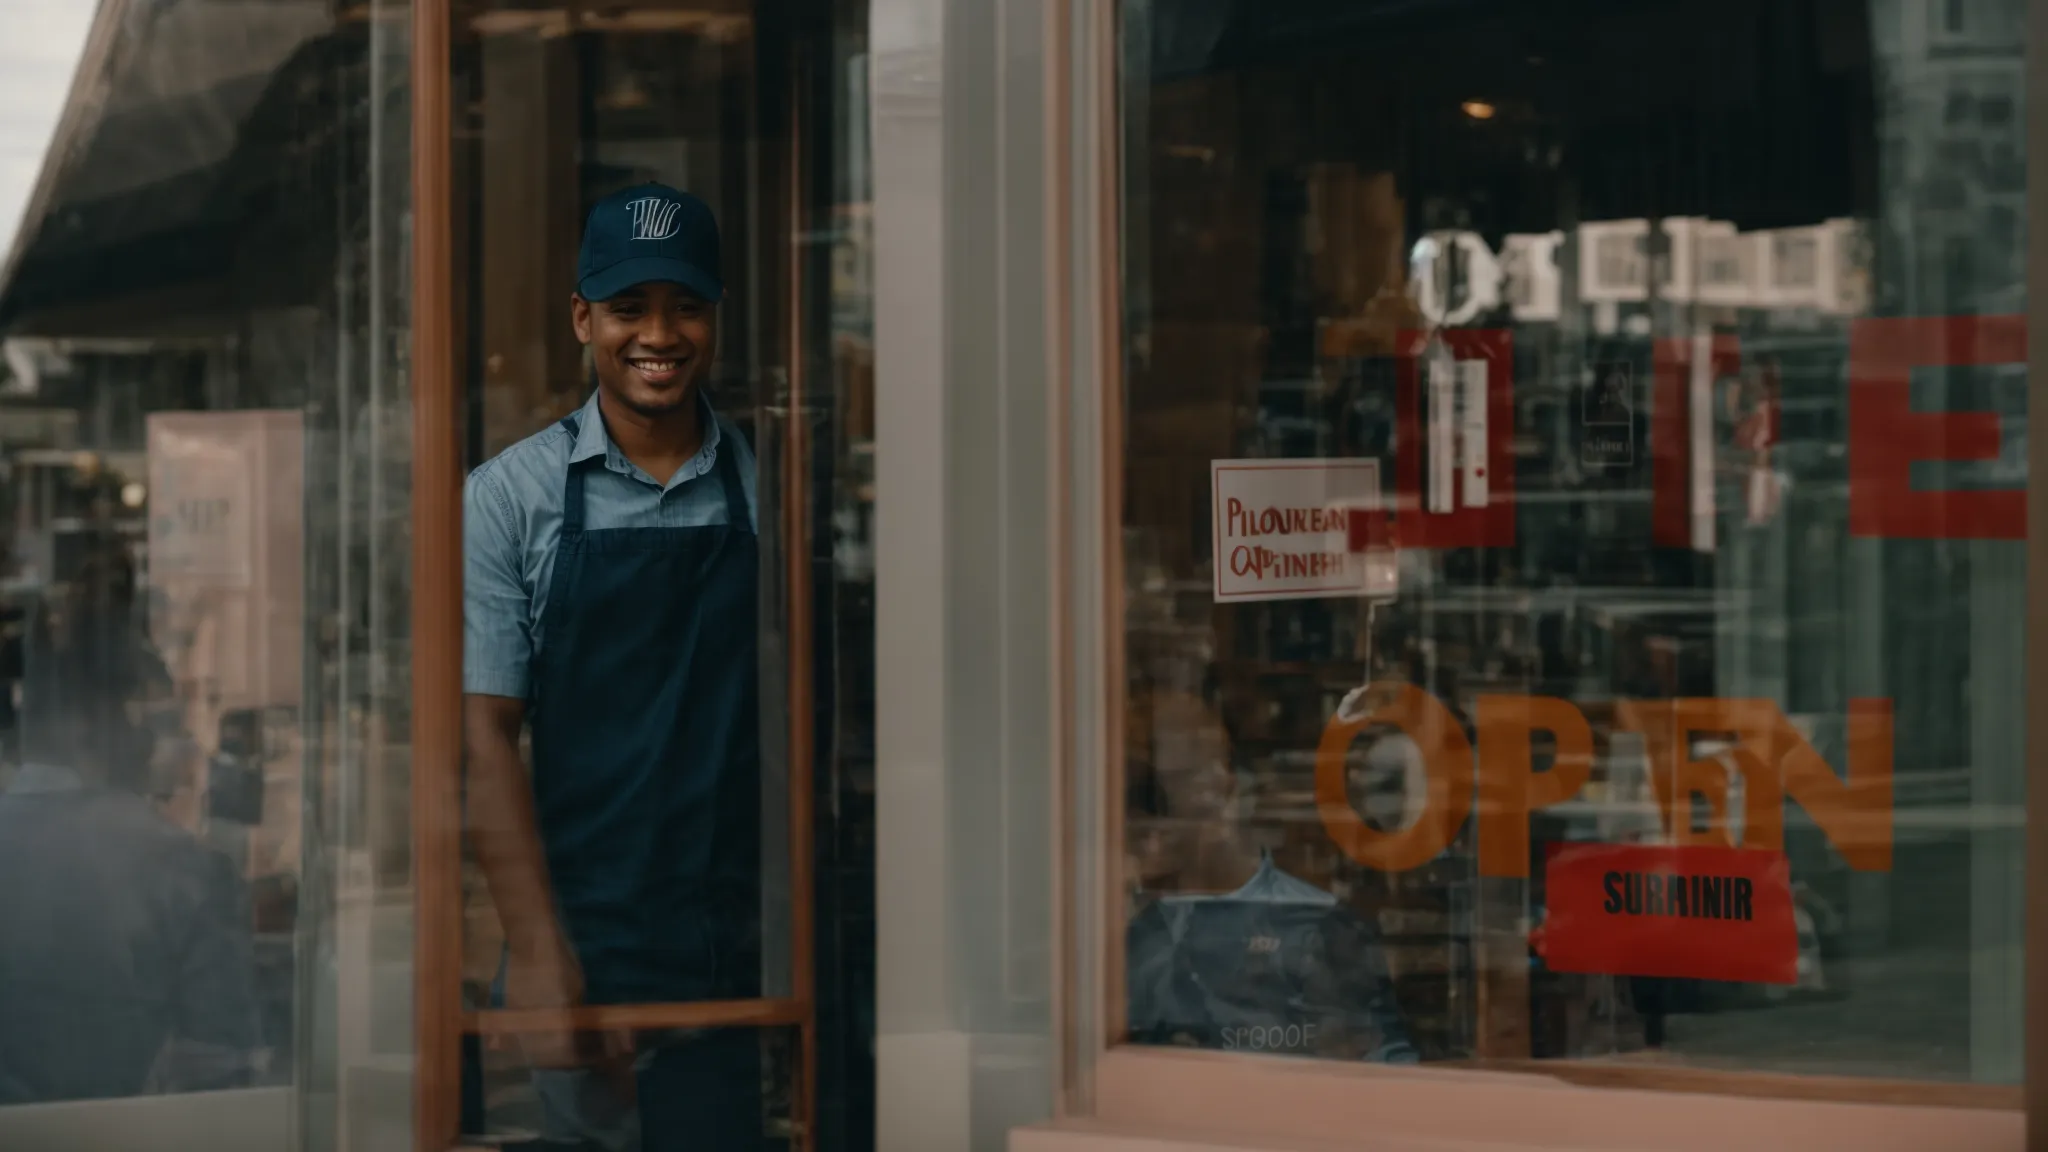 a local business owner smiling while placing an "open" sign in the storefront window.